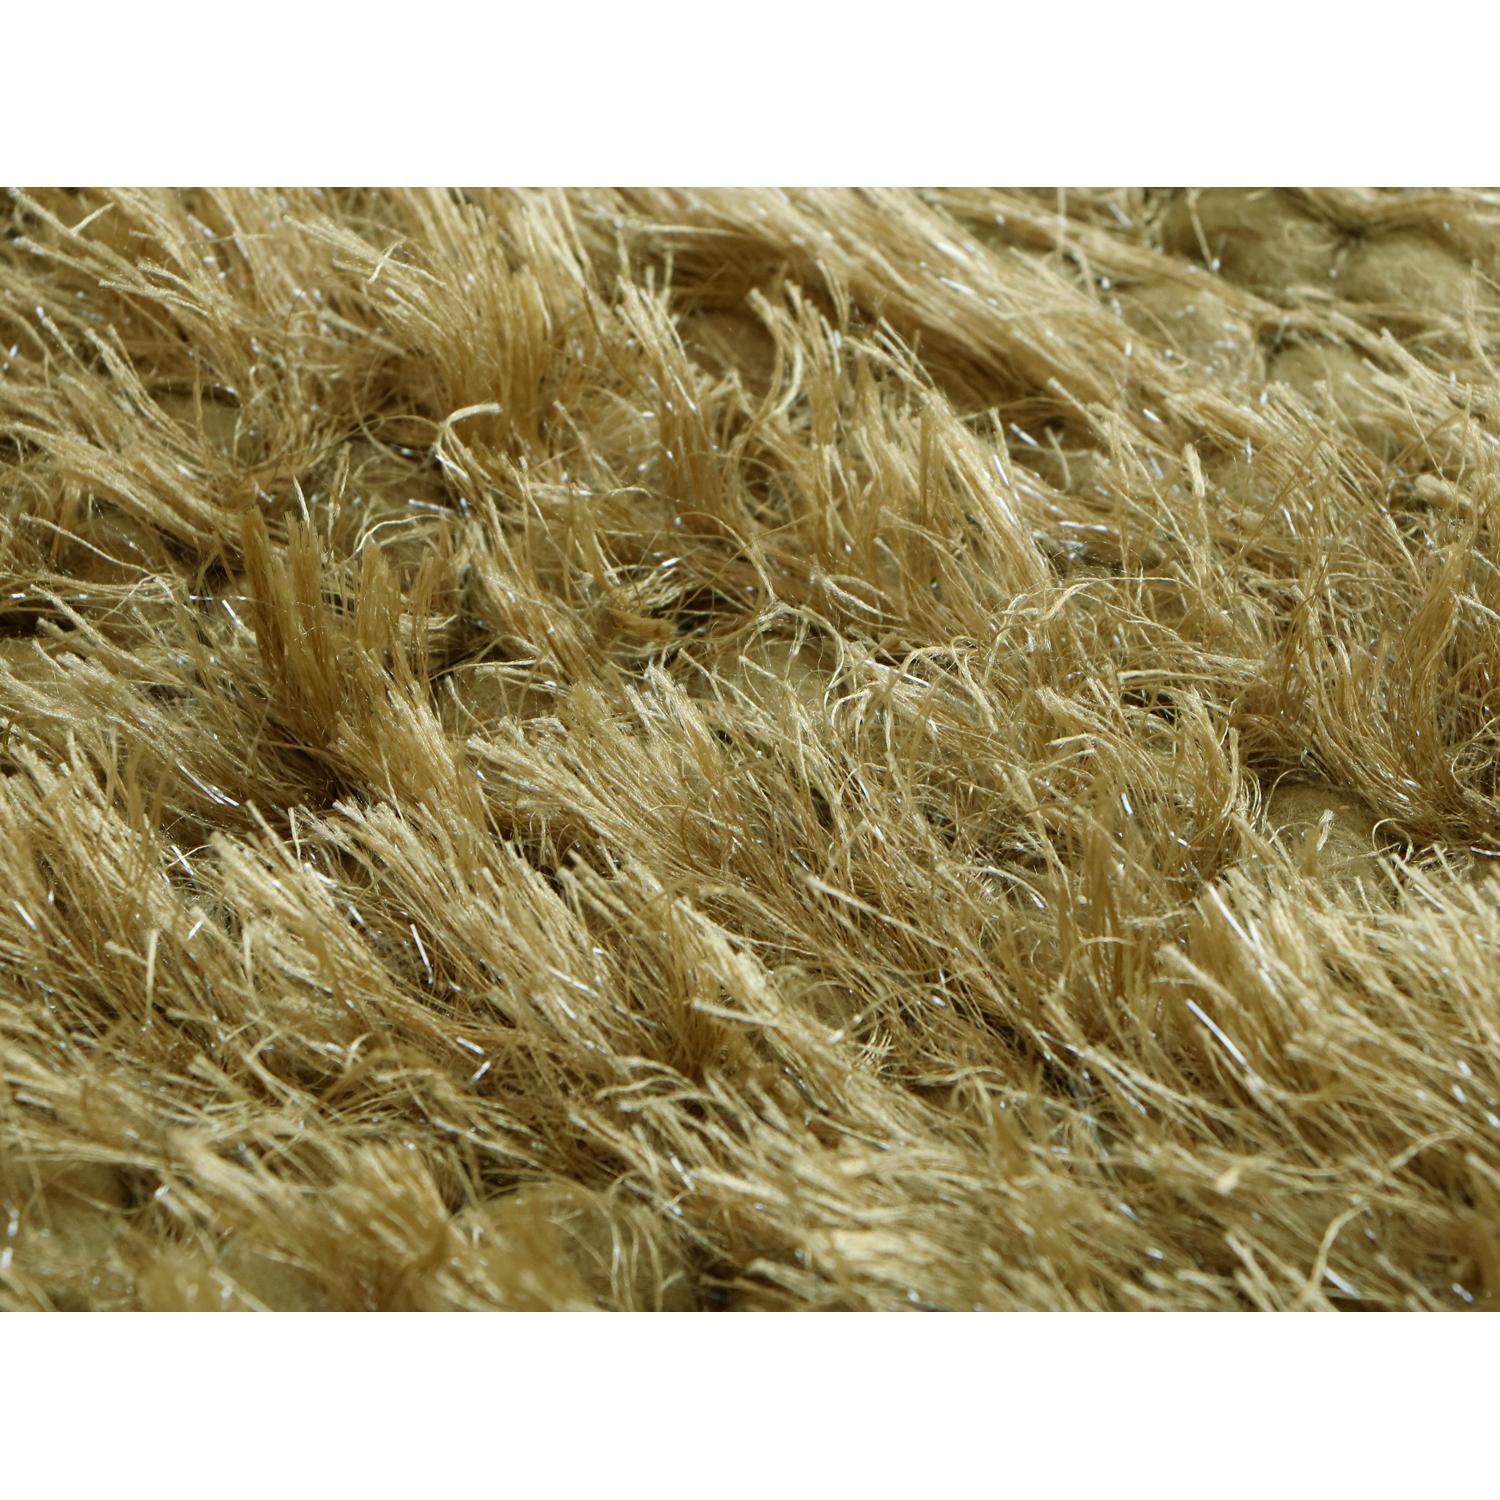 Modern Natural Inspired Luminous Spring Rug by Deanna Comellini In Stock 170x240 cm For Sale